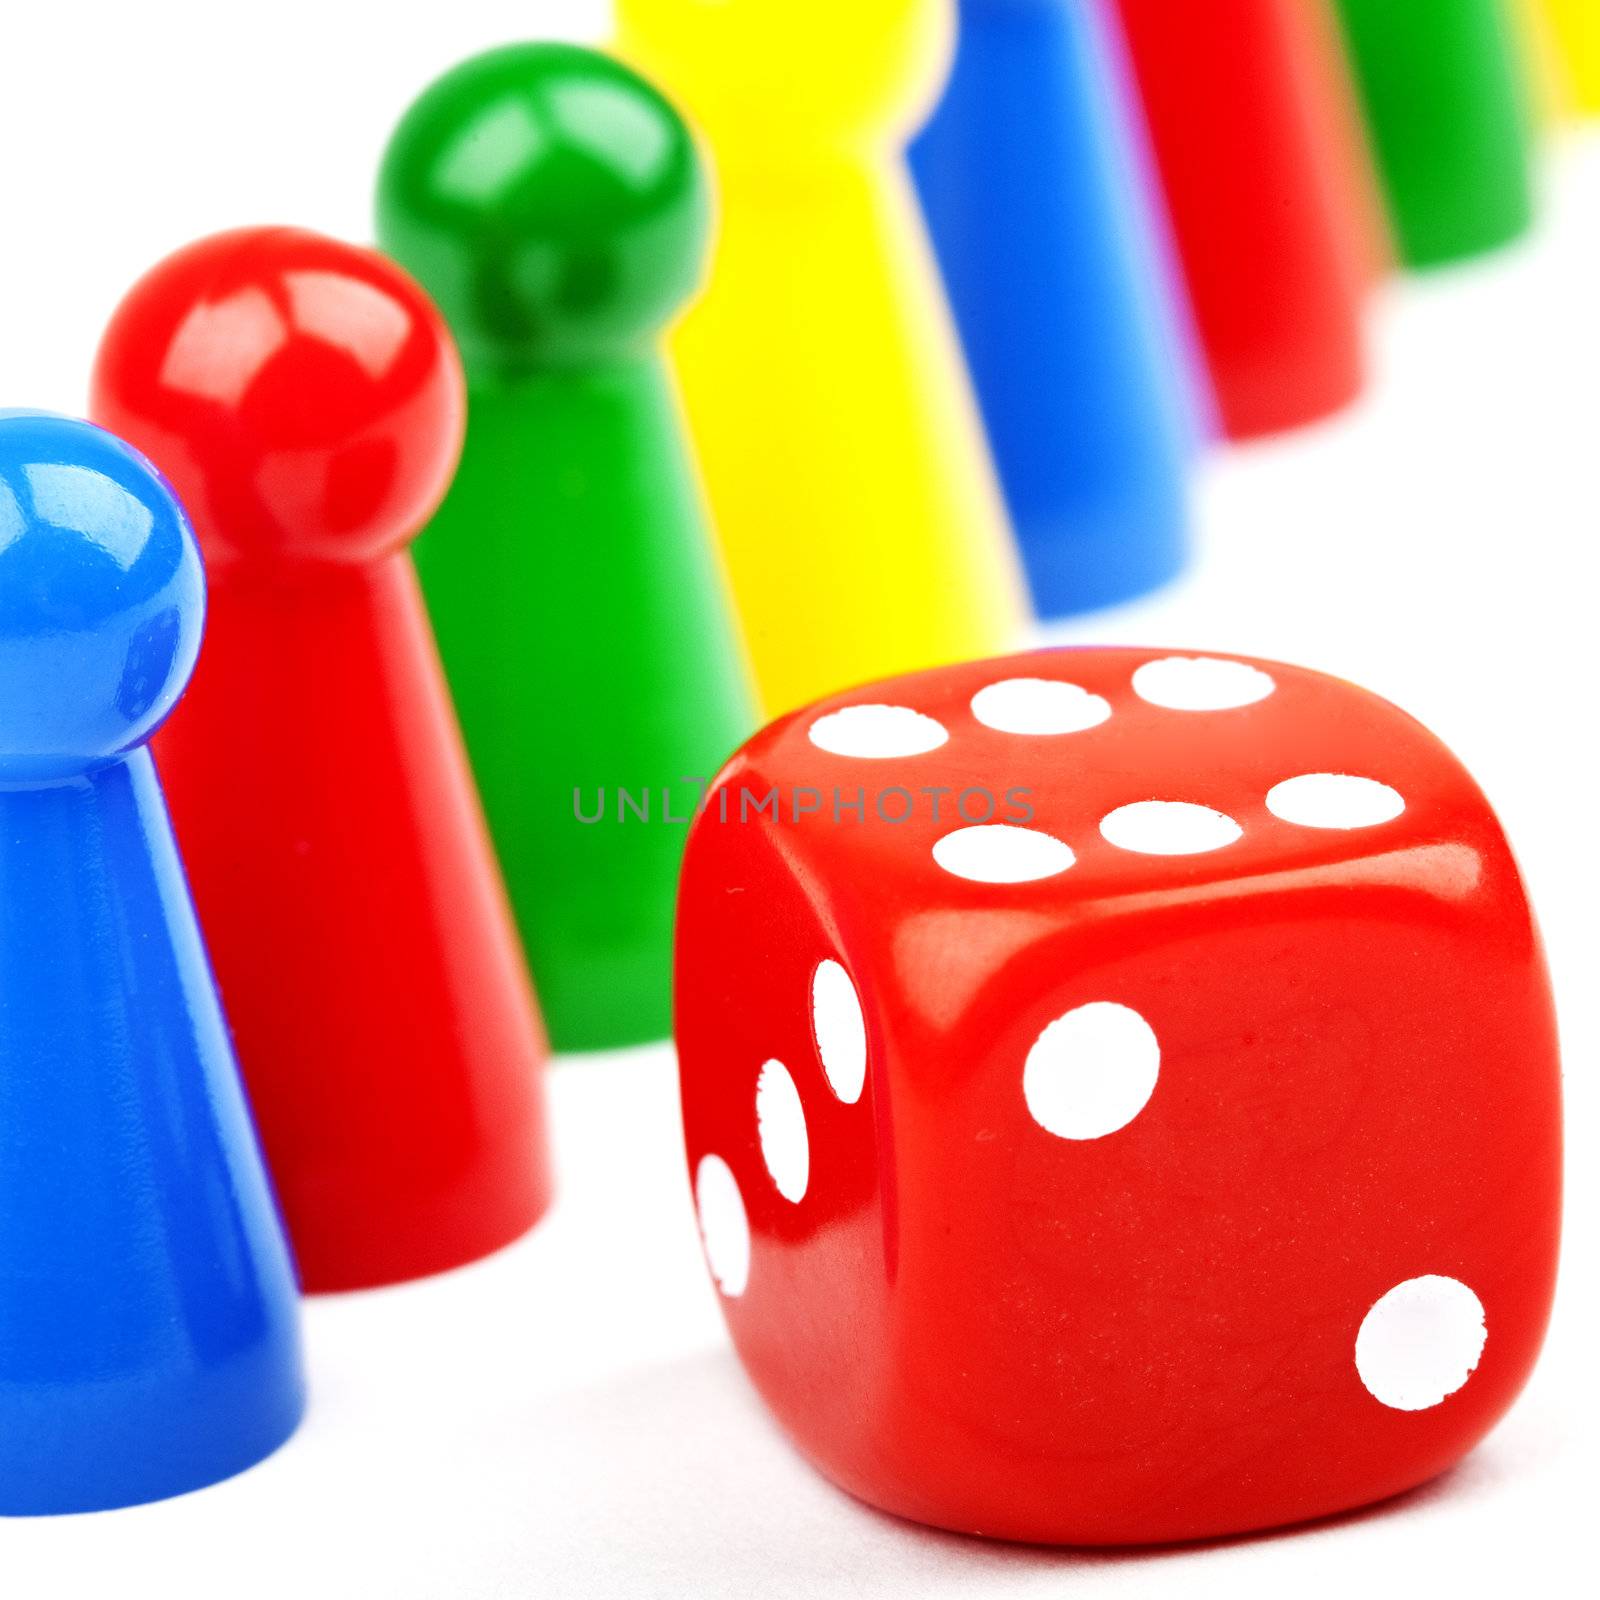 Board game Pieces and Dice over a plain white background.